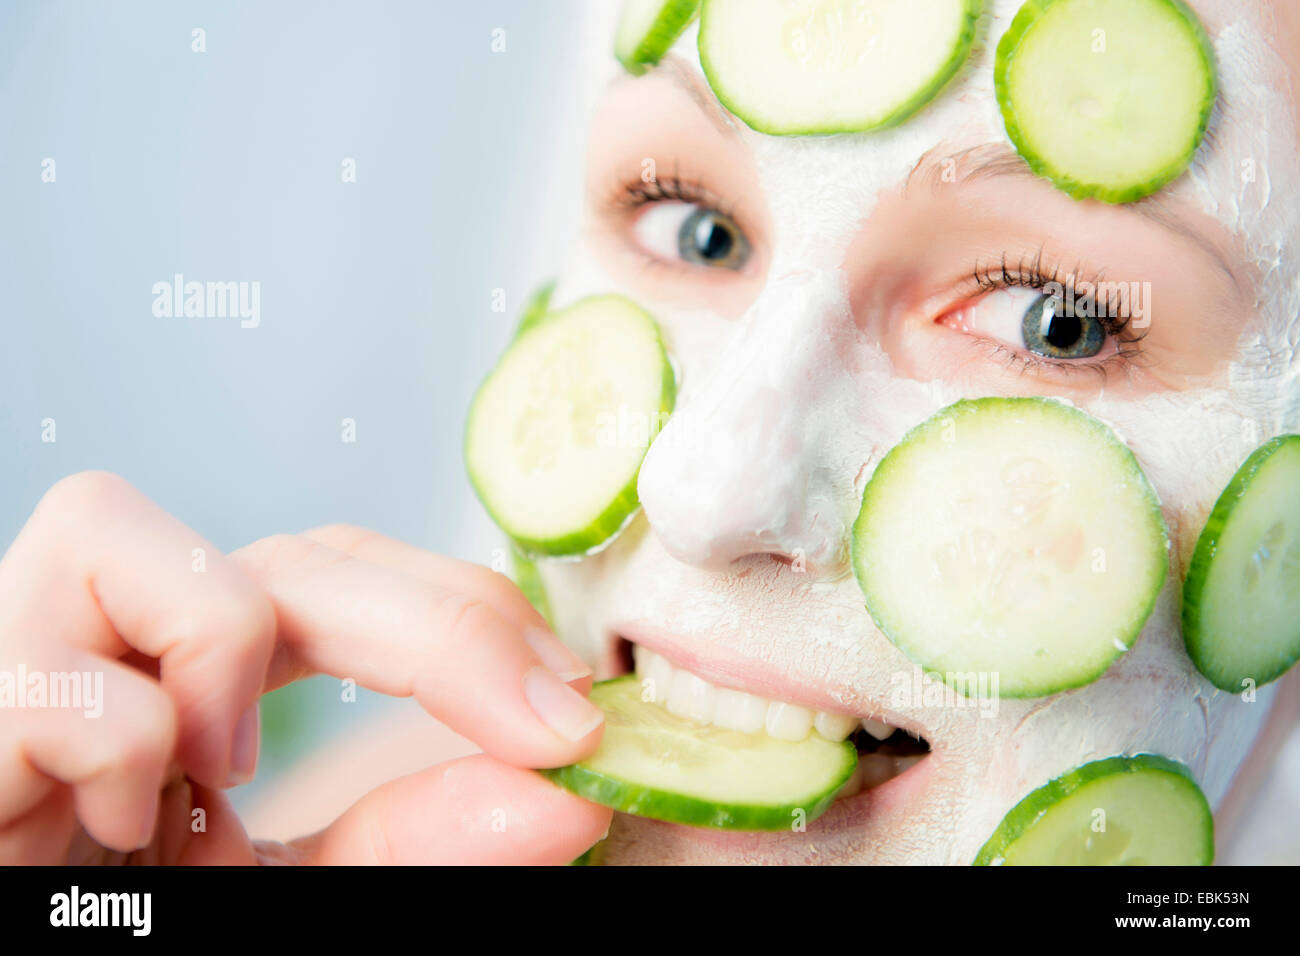 woman with cucumber face masque eating a cucumber slice Stock Photo